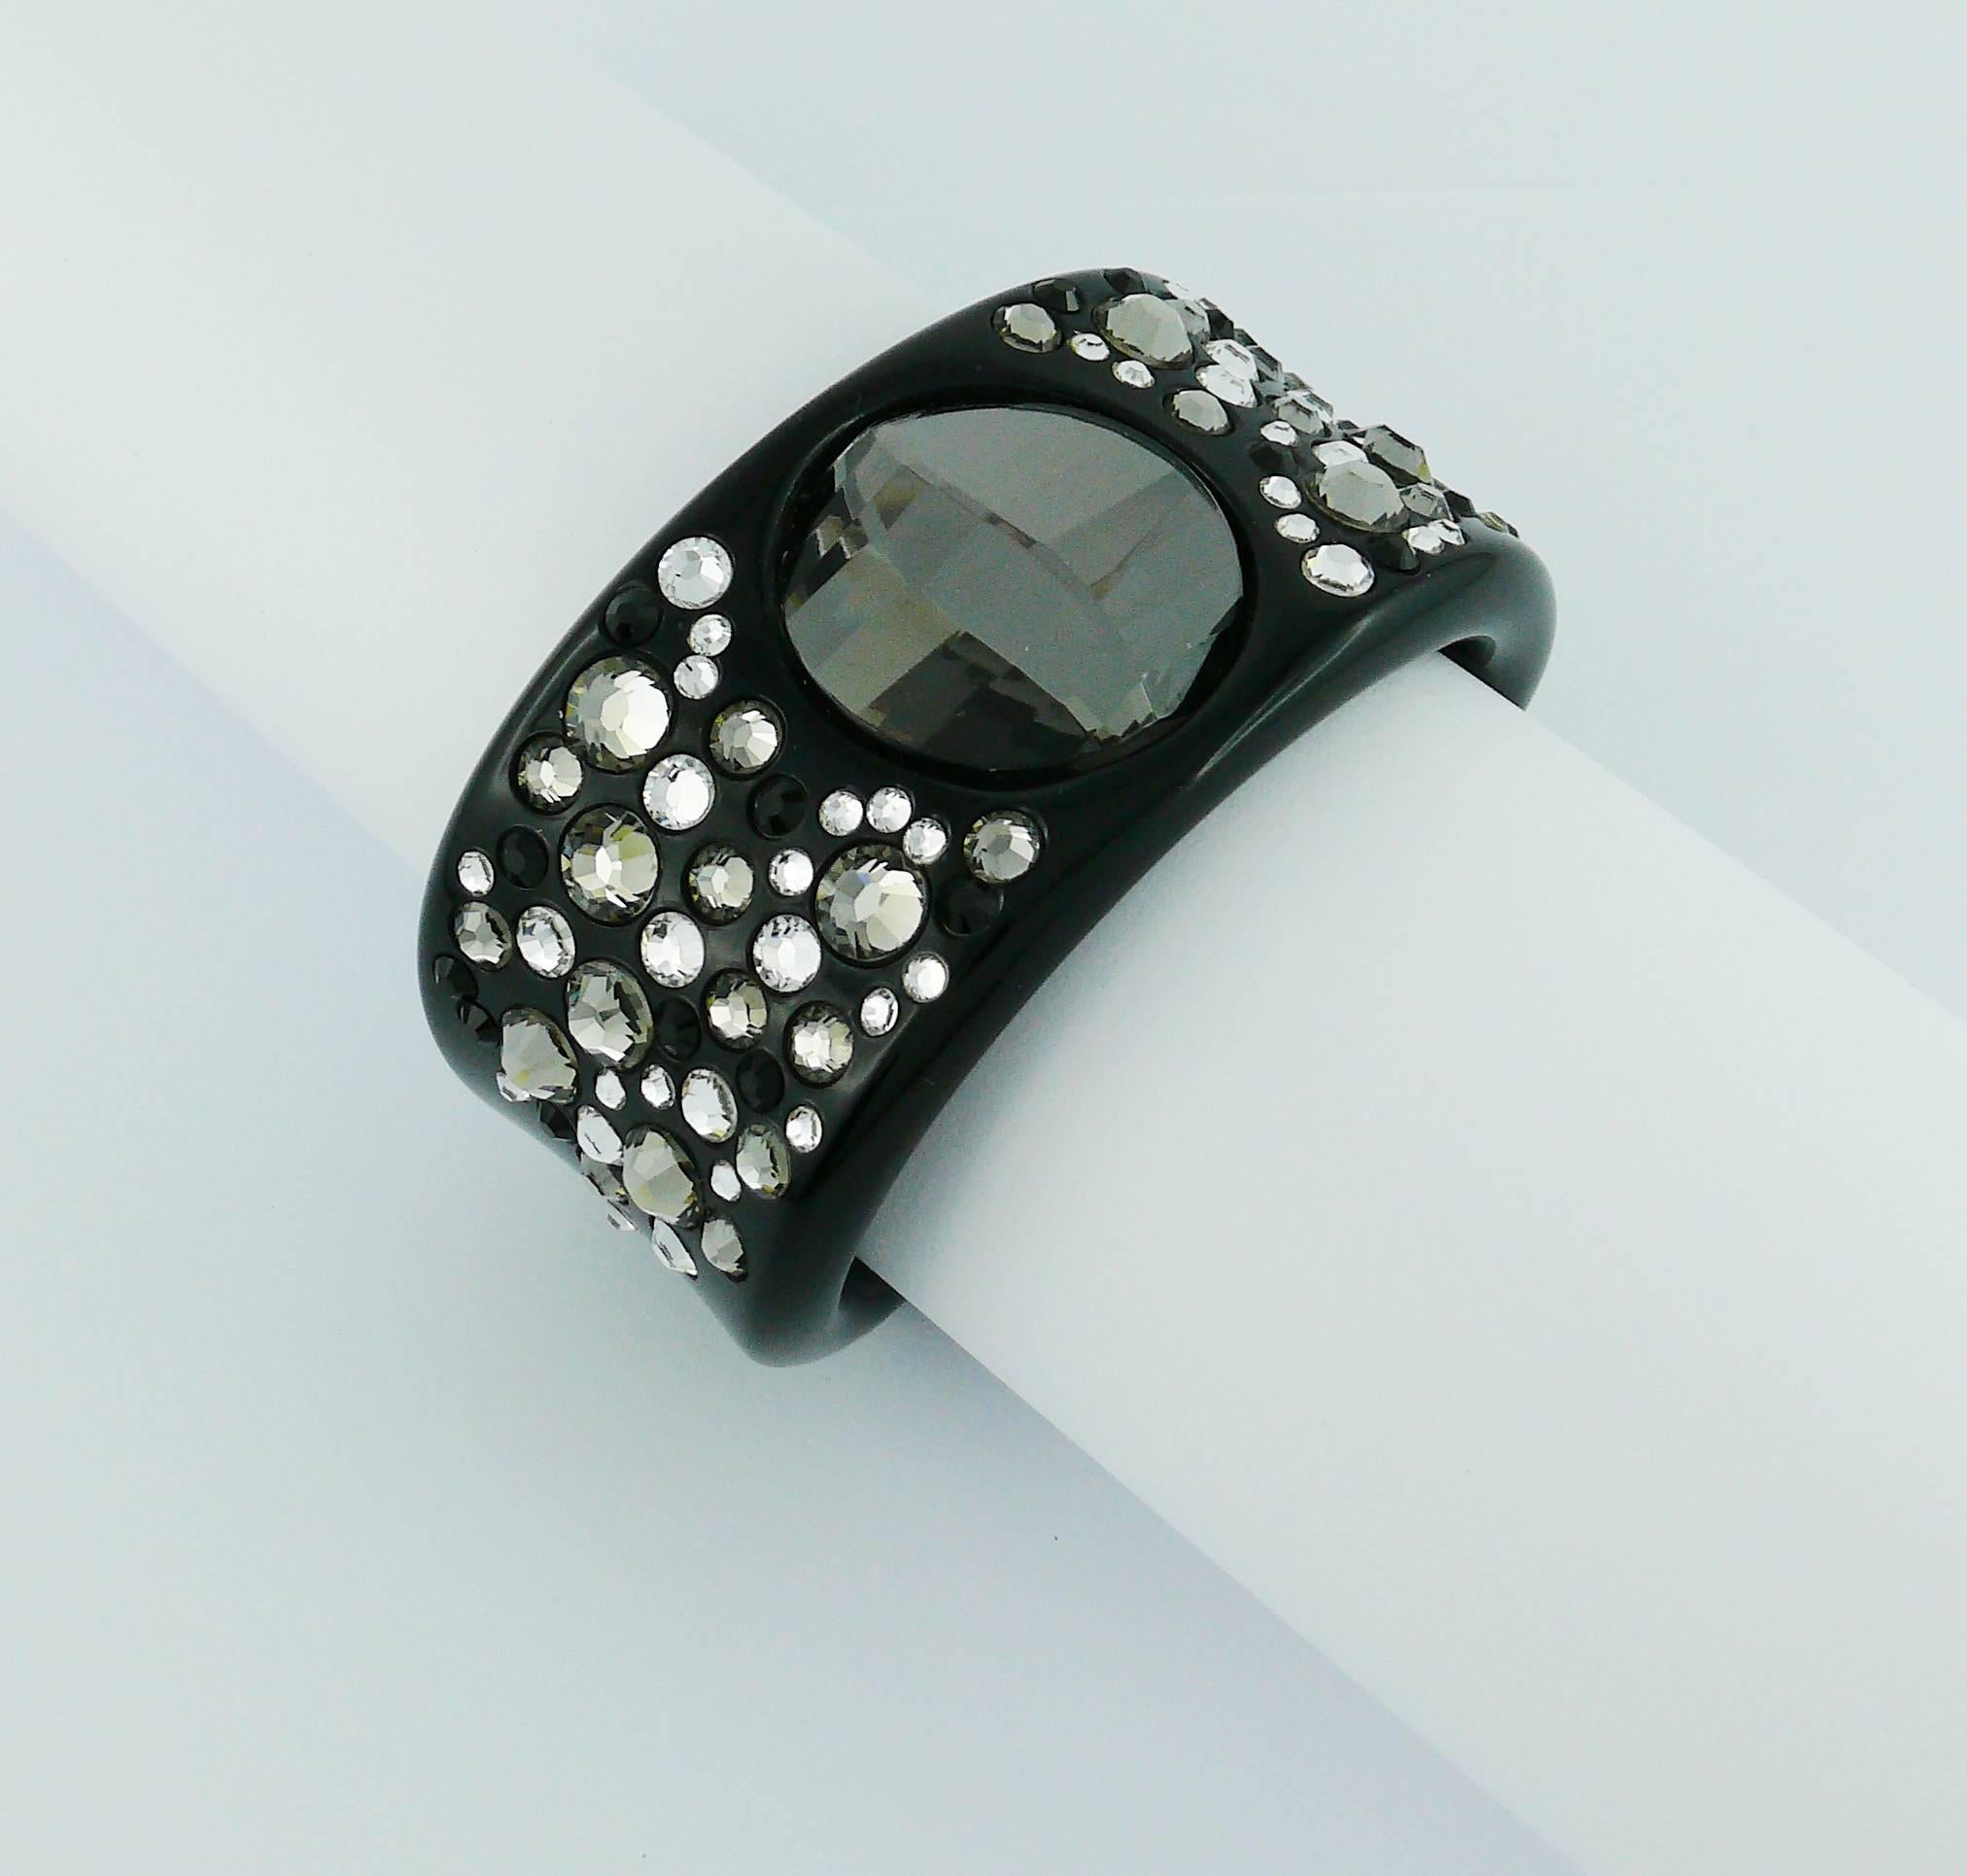 CHRISTIAN DIOR gorgeous black lucite cuff bracelet embellished with clear, "black diamond" and jet SWAROVSKI crystals.

Metal D (DIOR) on both ends of the cuff.

Indicative measurements : inner length 6.2 cm (2.44 inches) / width approx.